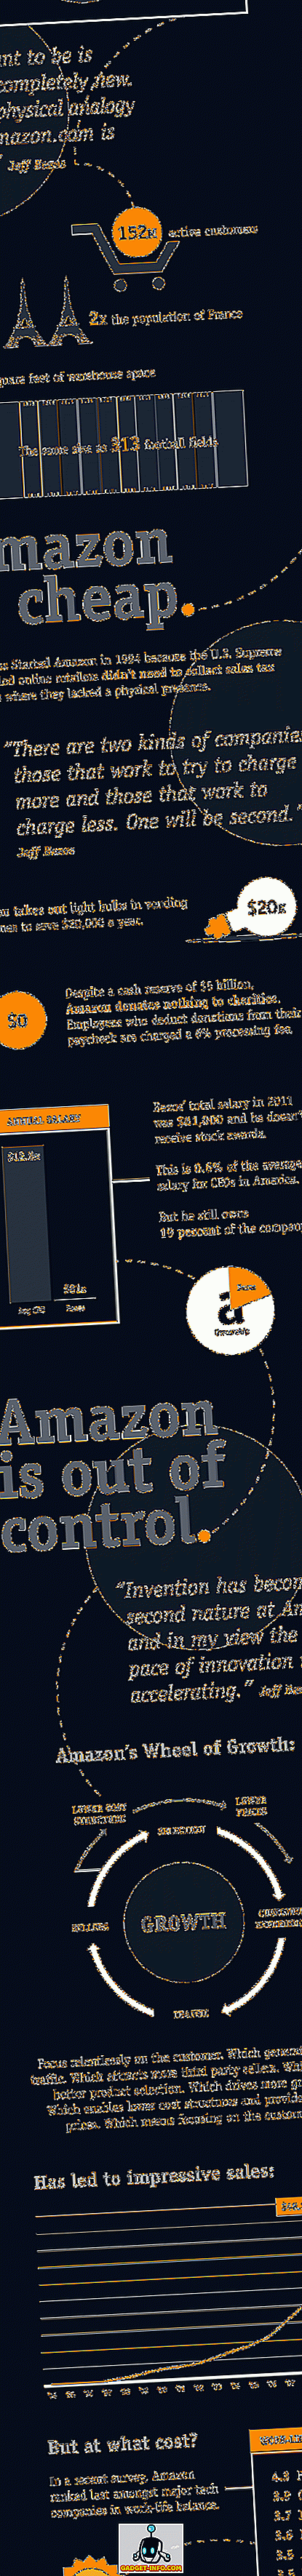 Amazon - The Inside Story [Infographic]